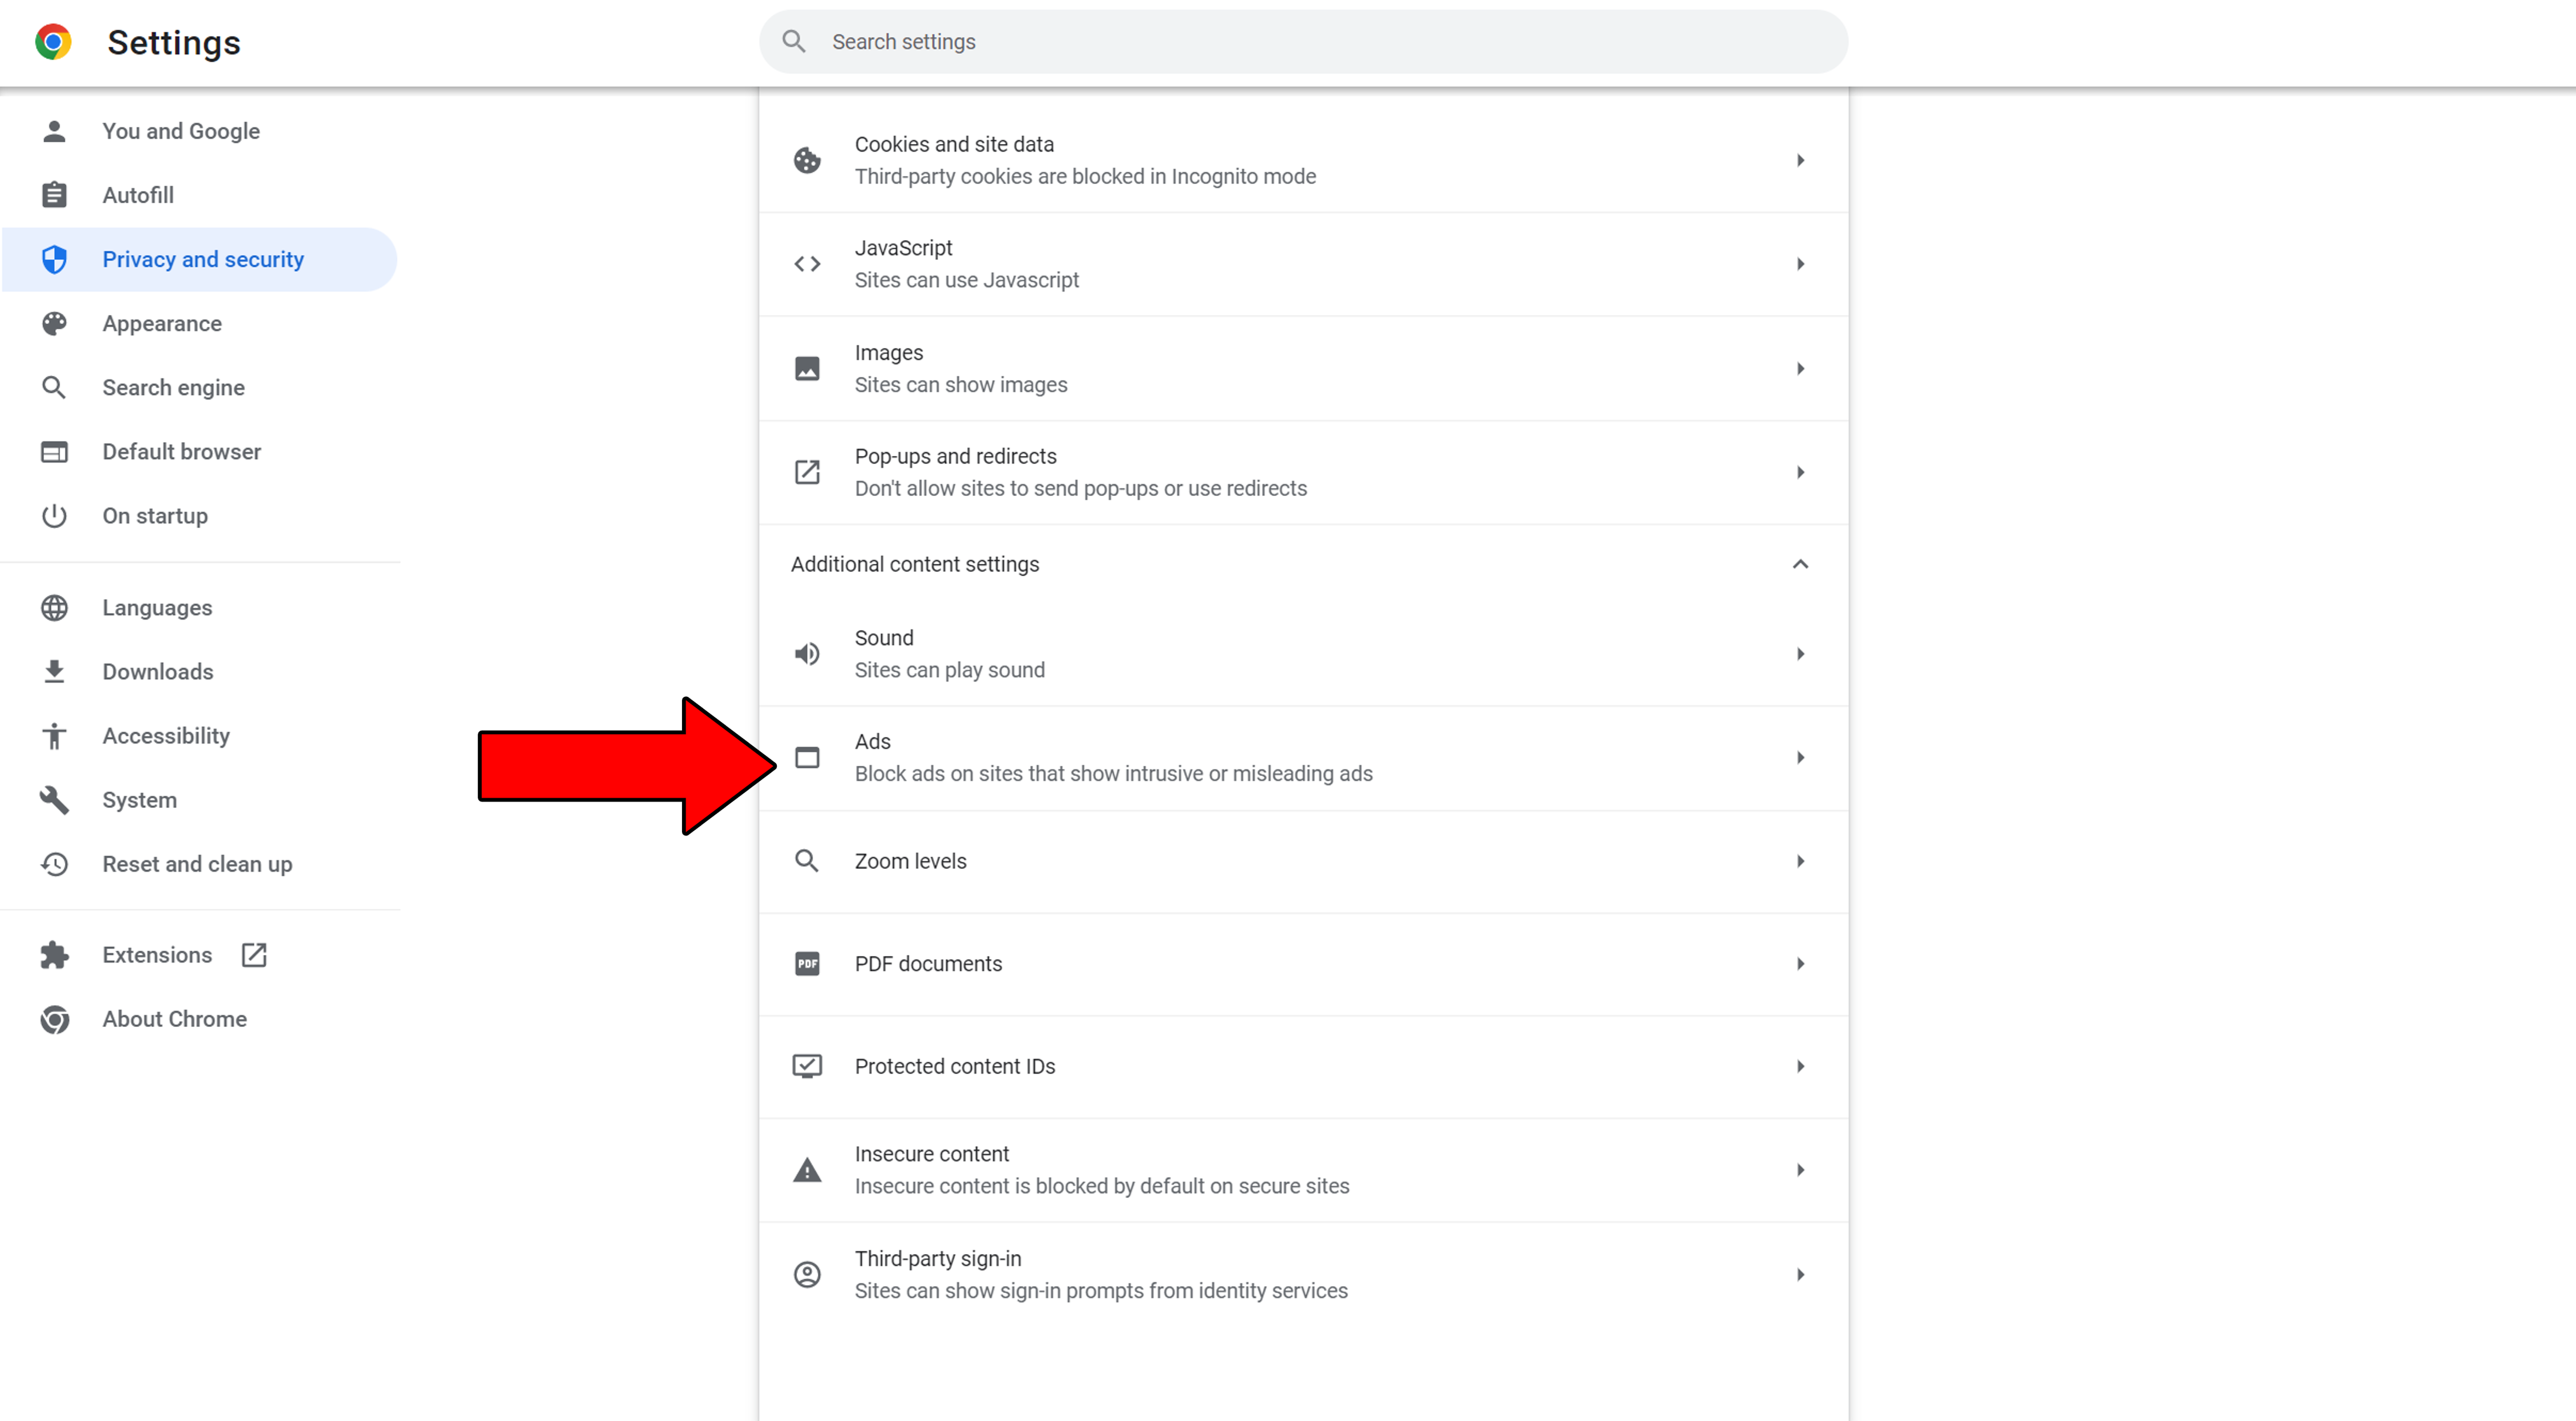 How to manage Ads on Google Chrome